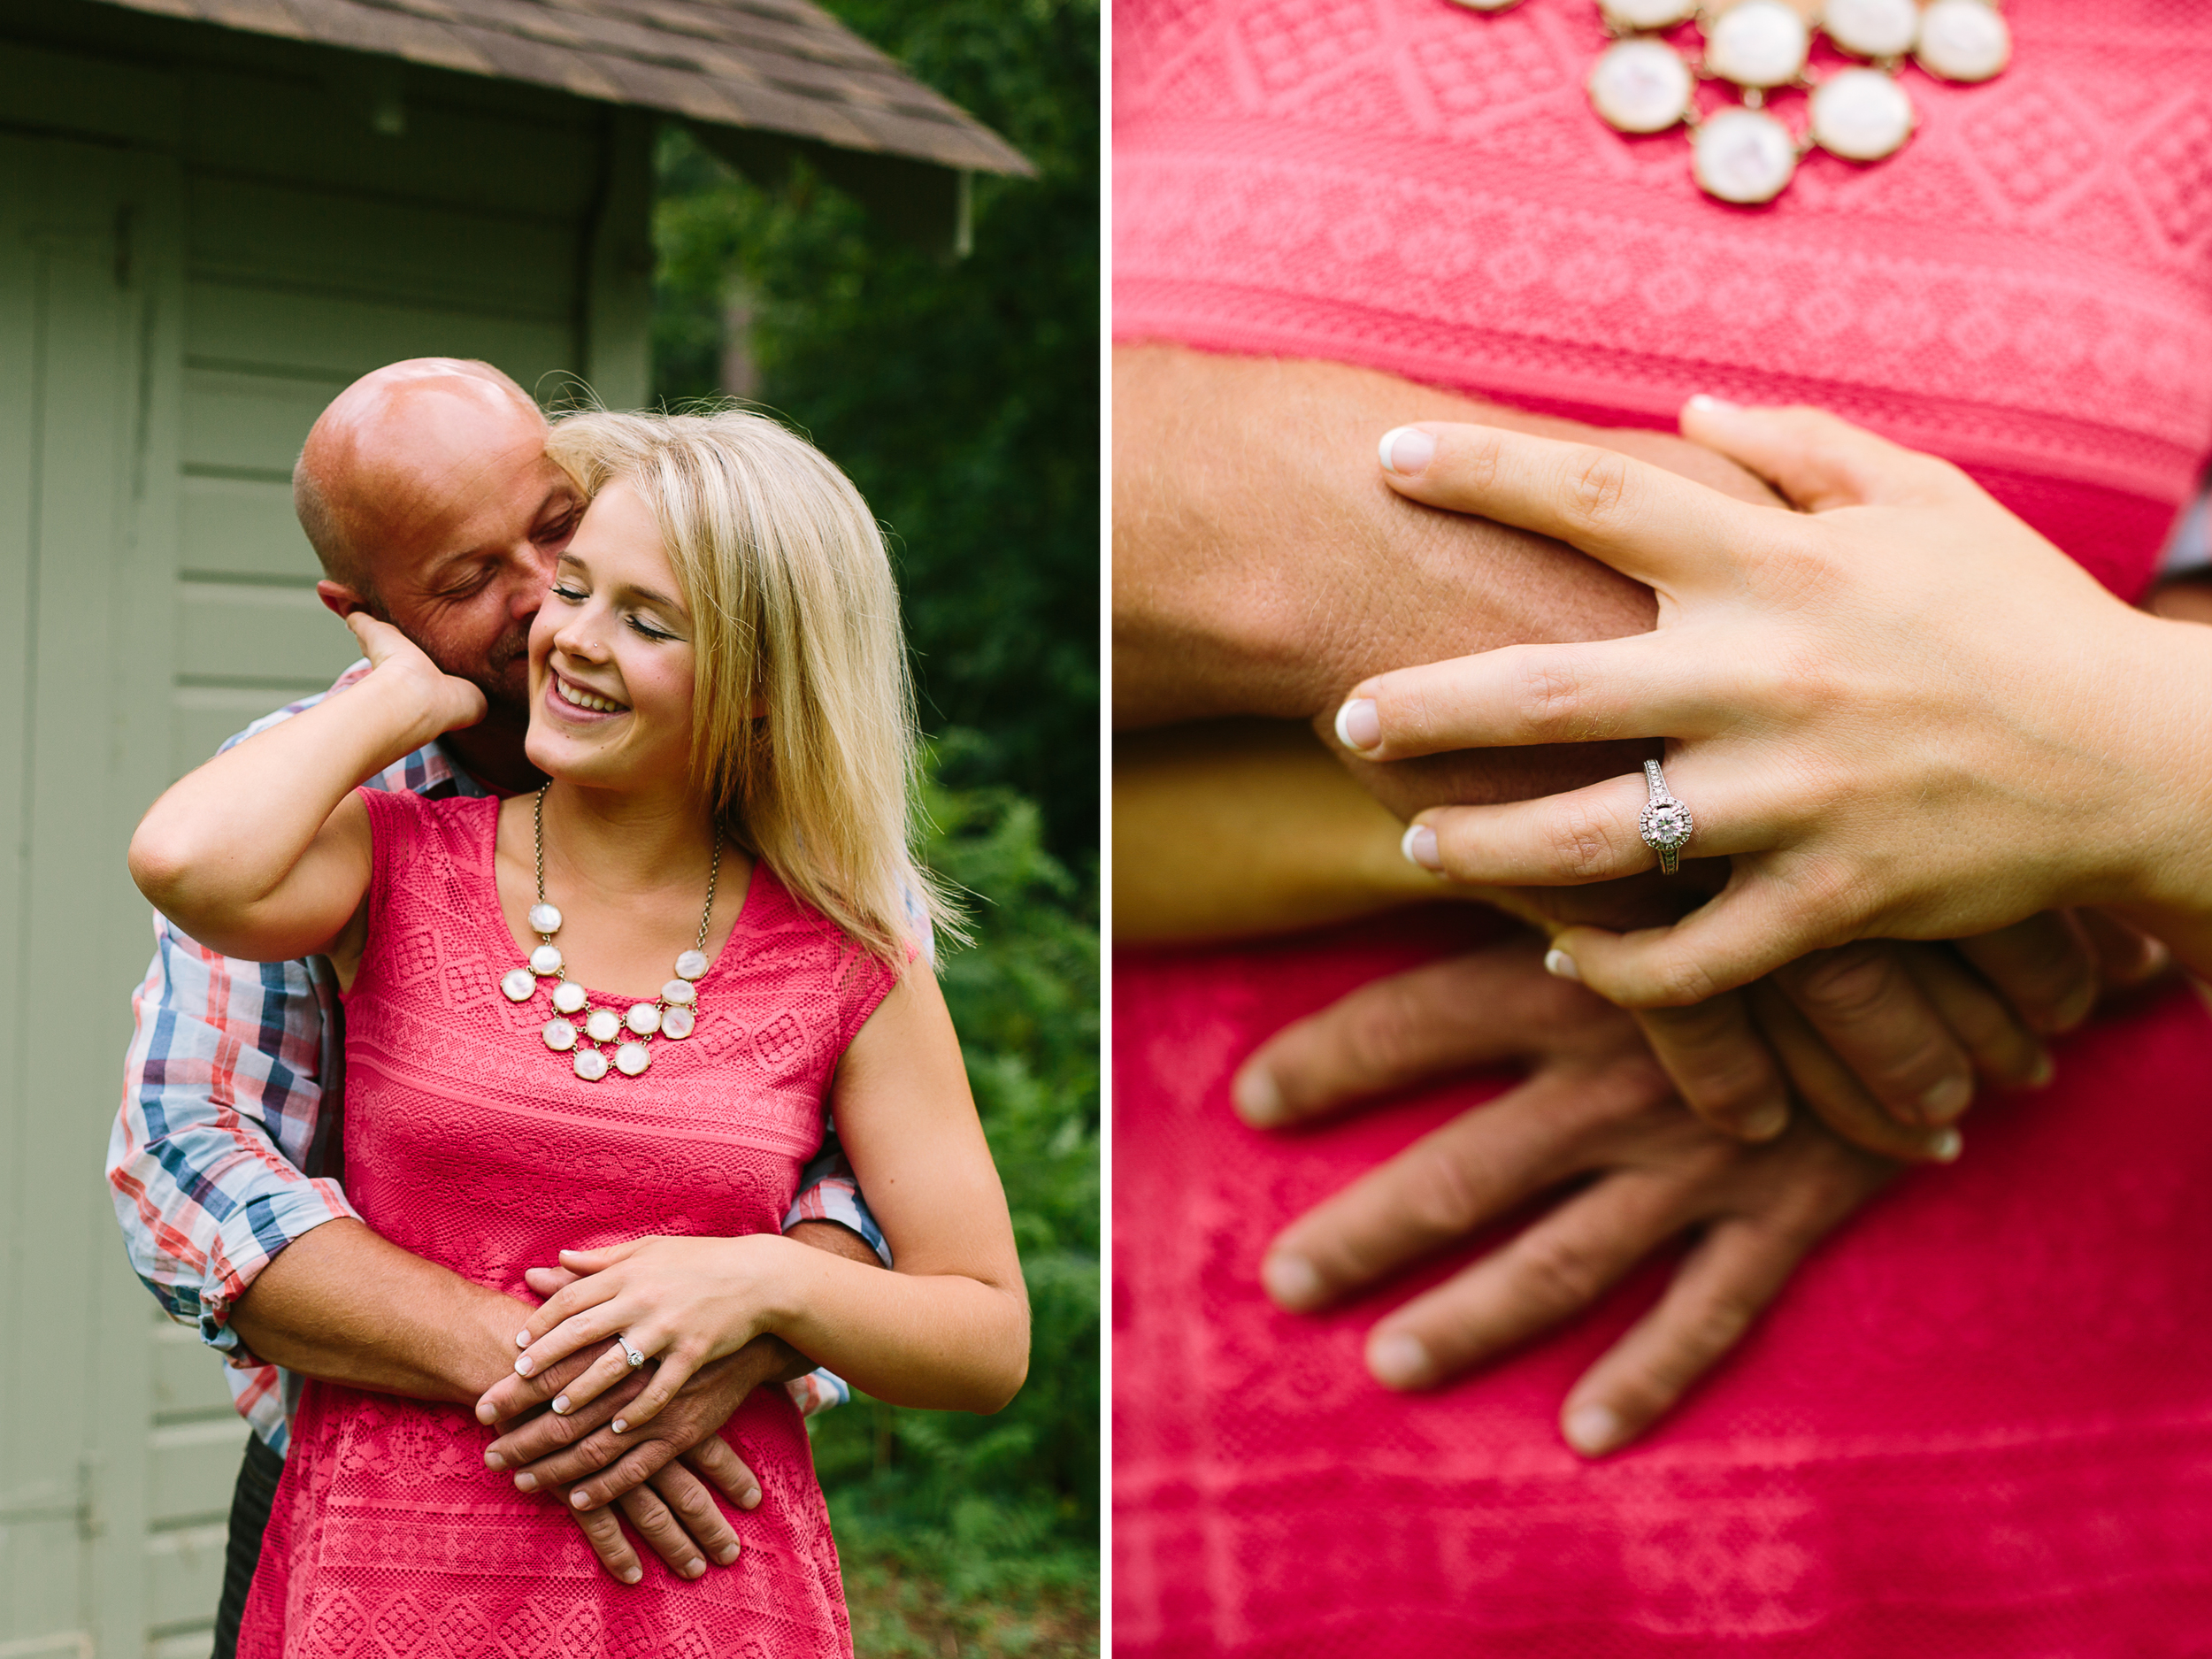 Grand View Lodge Brainerd Summer Engagement Session